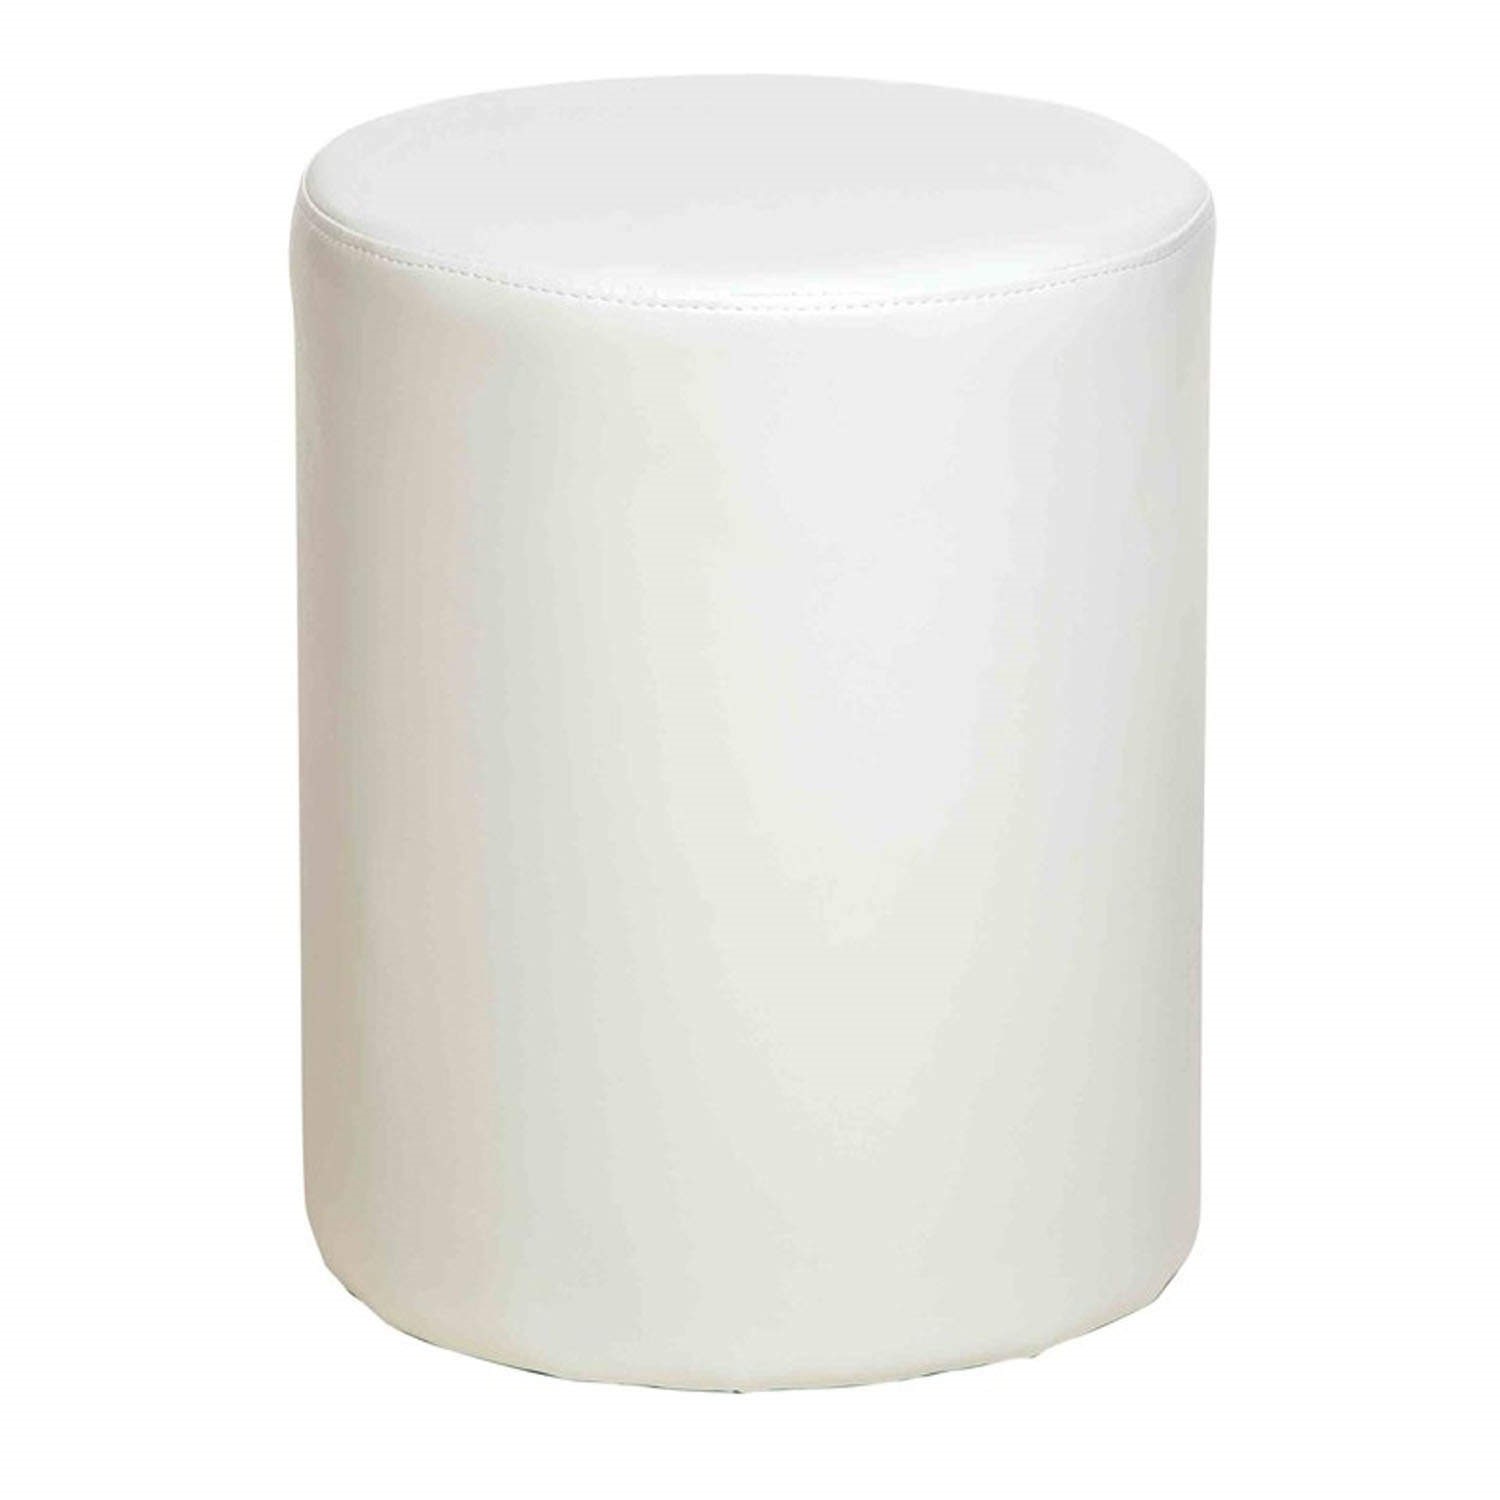 Town Round Dressing Table Stool, Round Dressing Table Stool